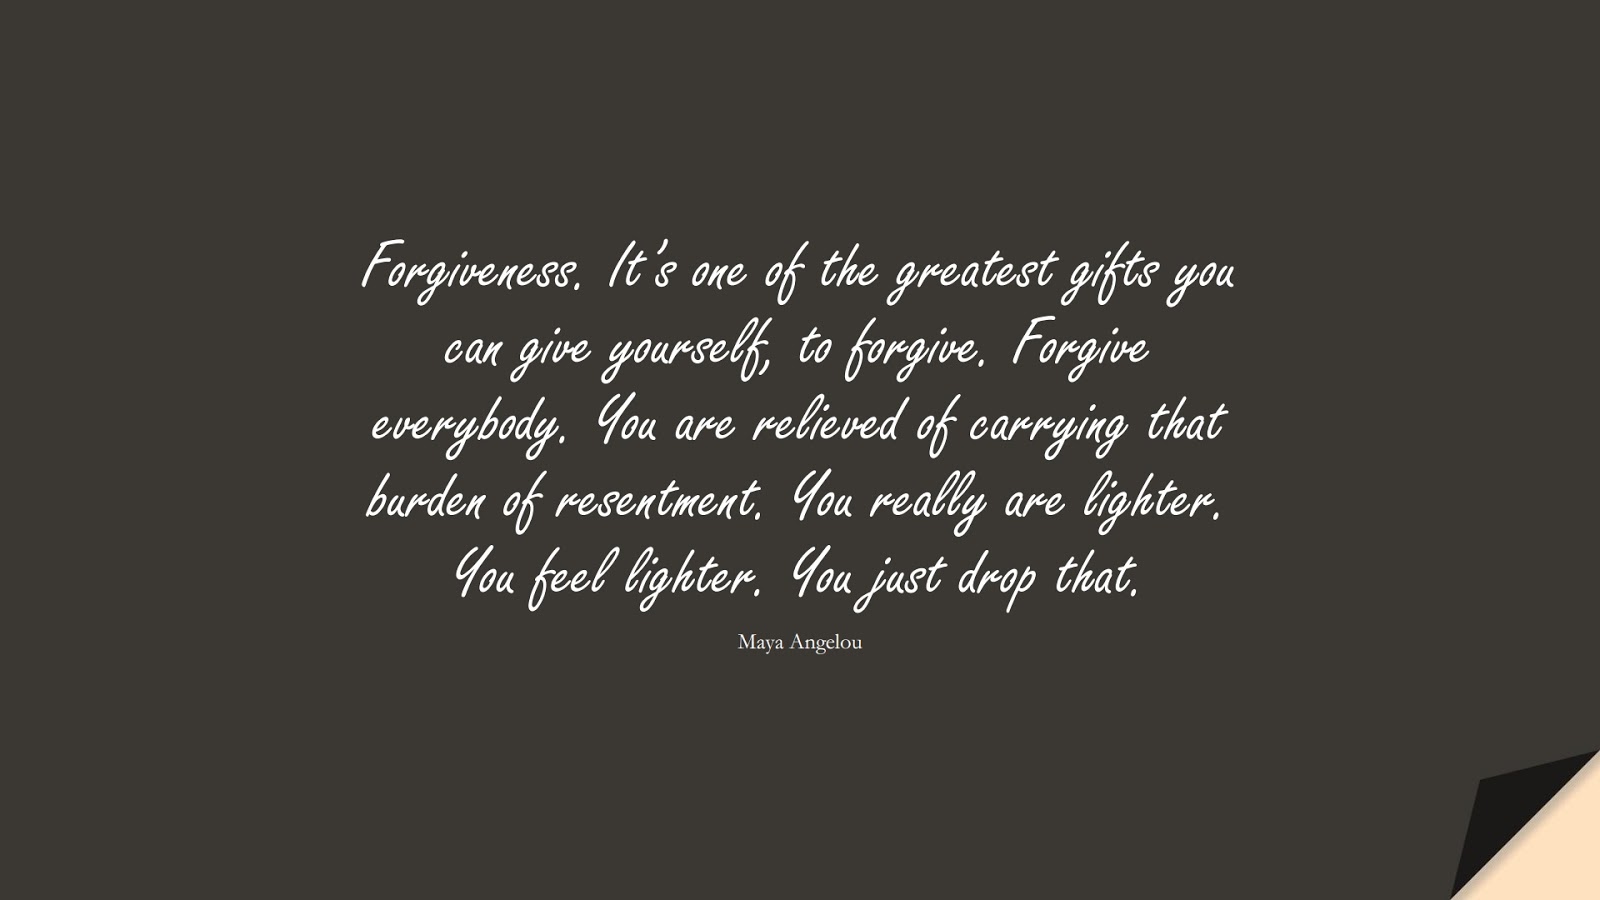 Forgiveness. It’s one of the greatest gifts you can give yourself, to forgive. Forgive everybody. You are relieved of carrying that burden of resentment. You really are lighter. You feel lighter. You just drop that. (Maya Angelou);  #MayaAngelouQuotes